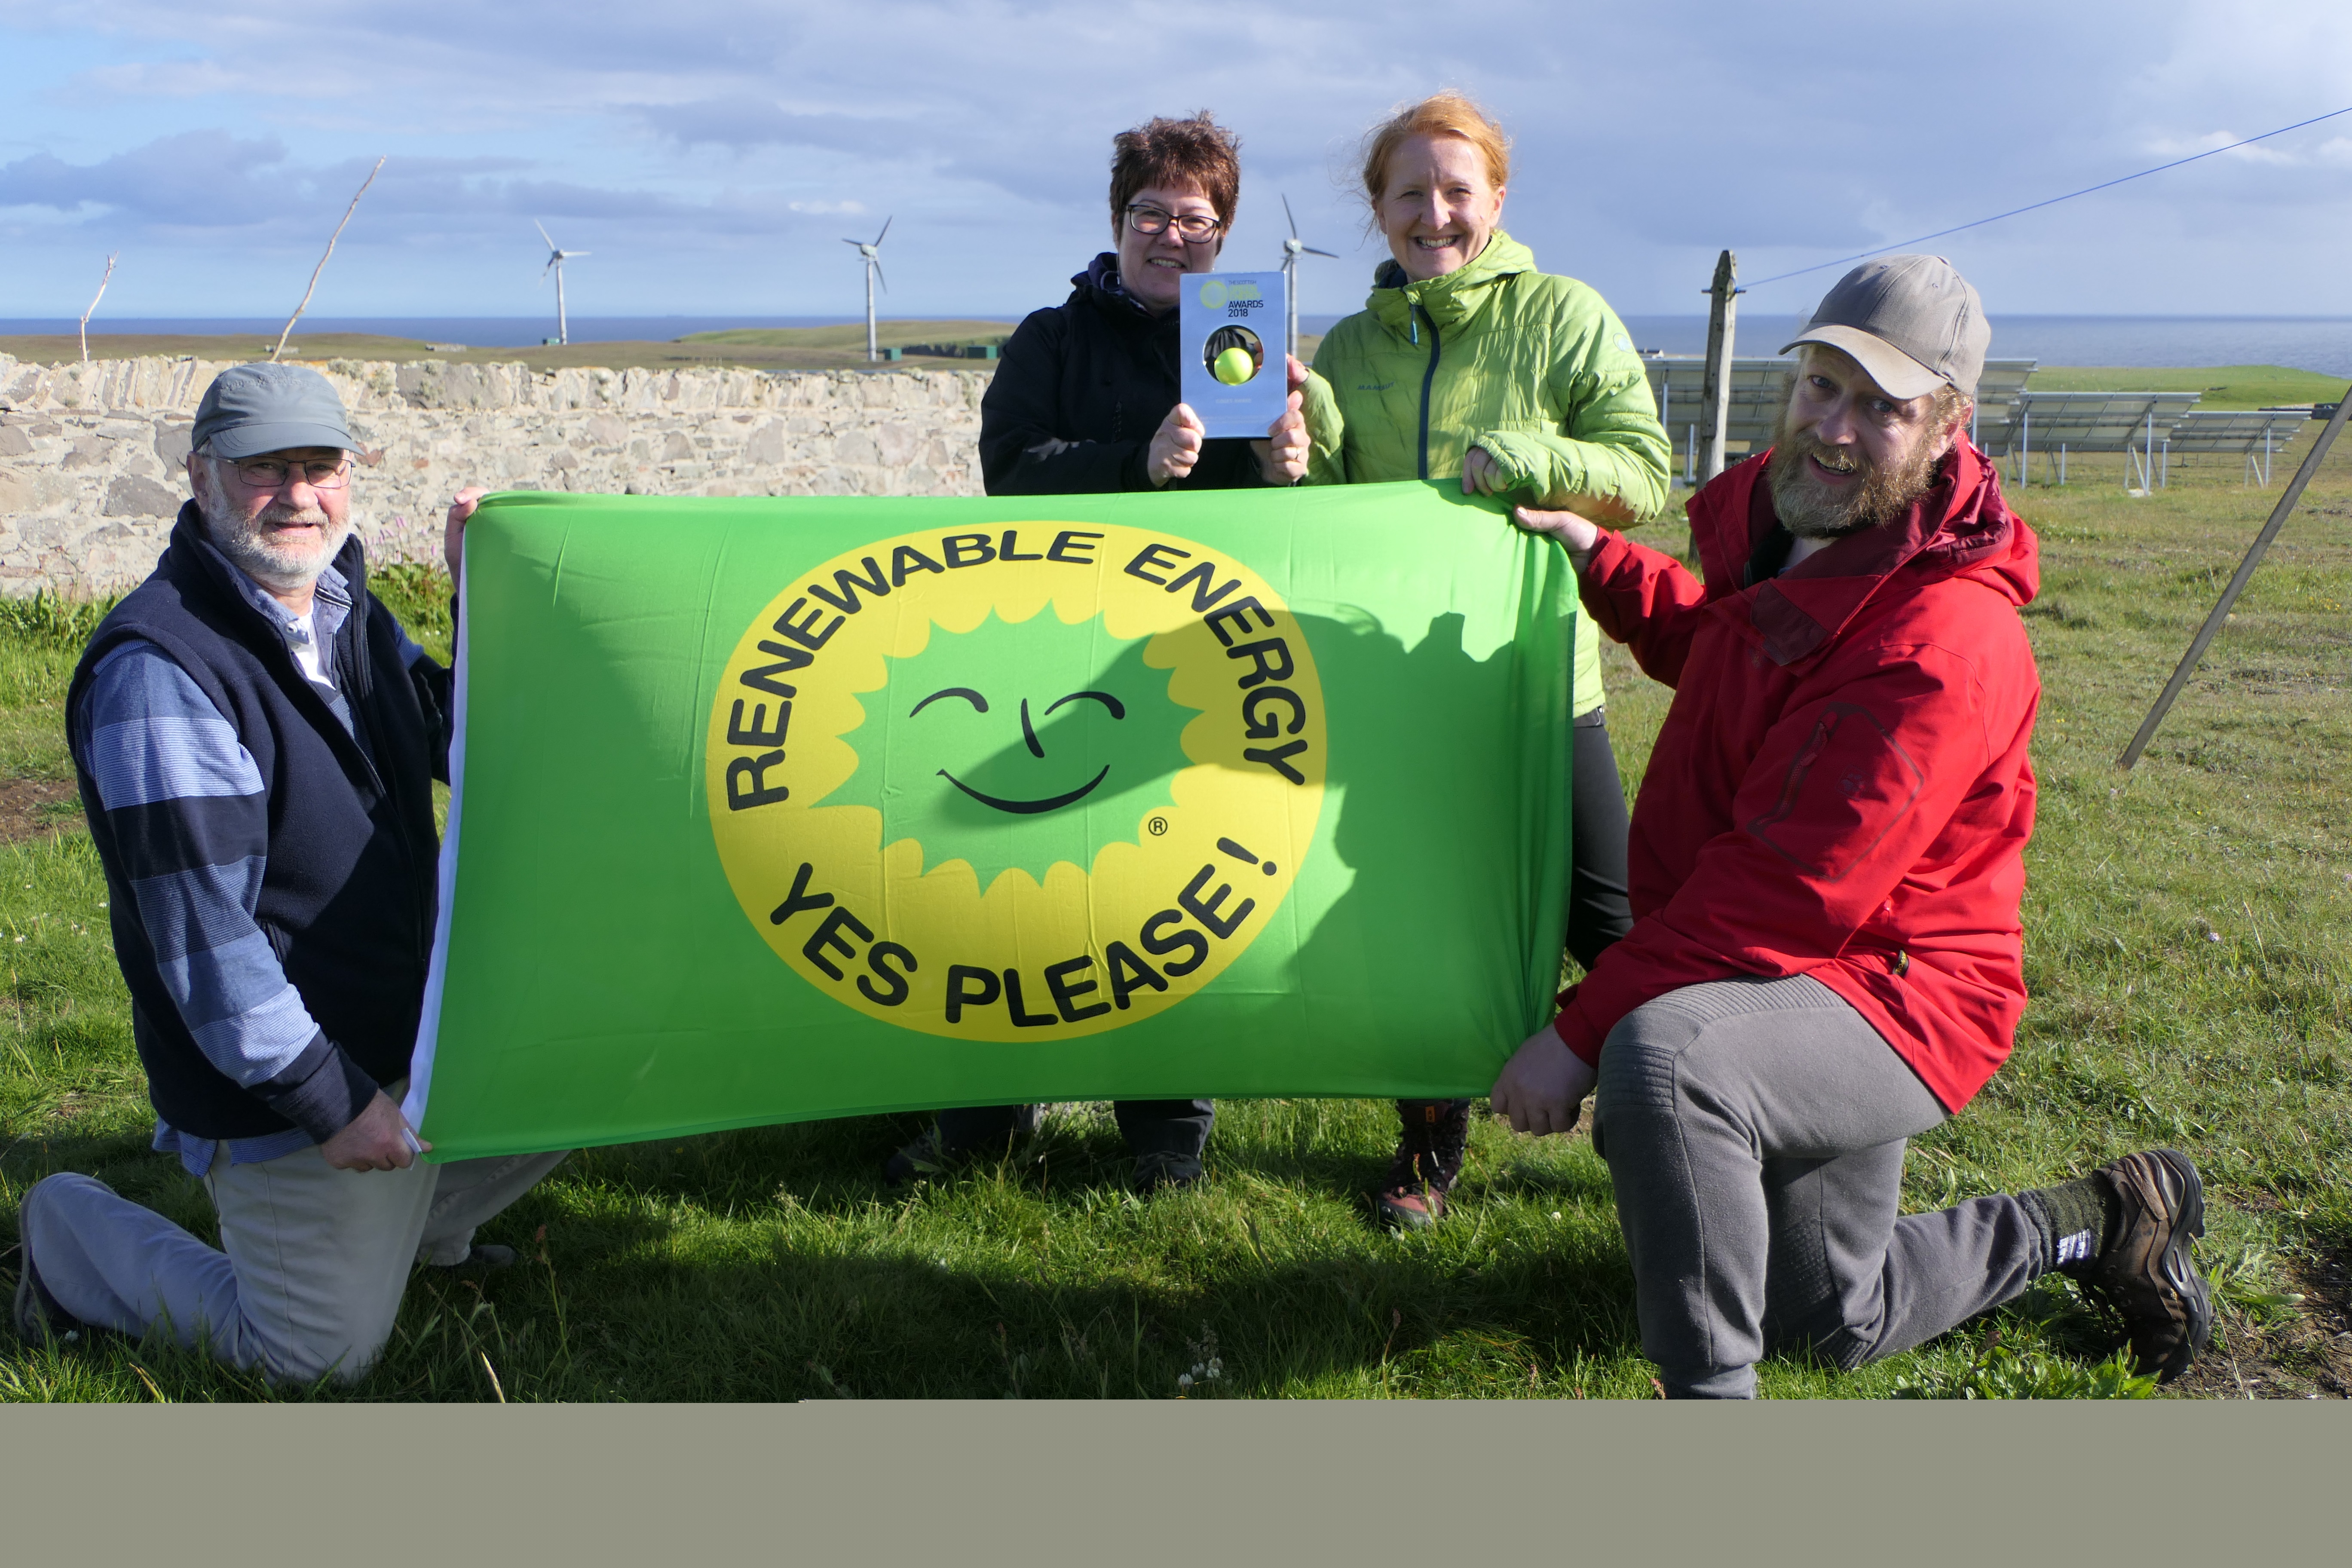 Foula is embracing the clean energy challenge